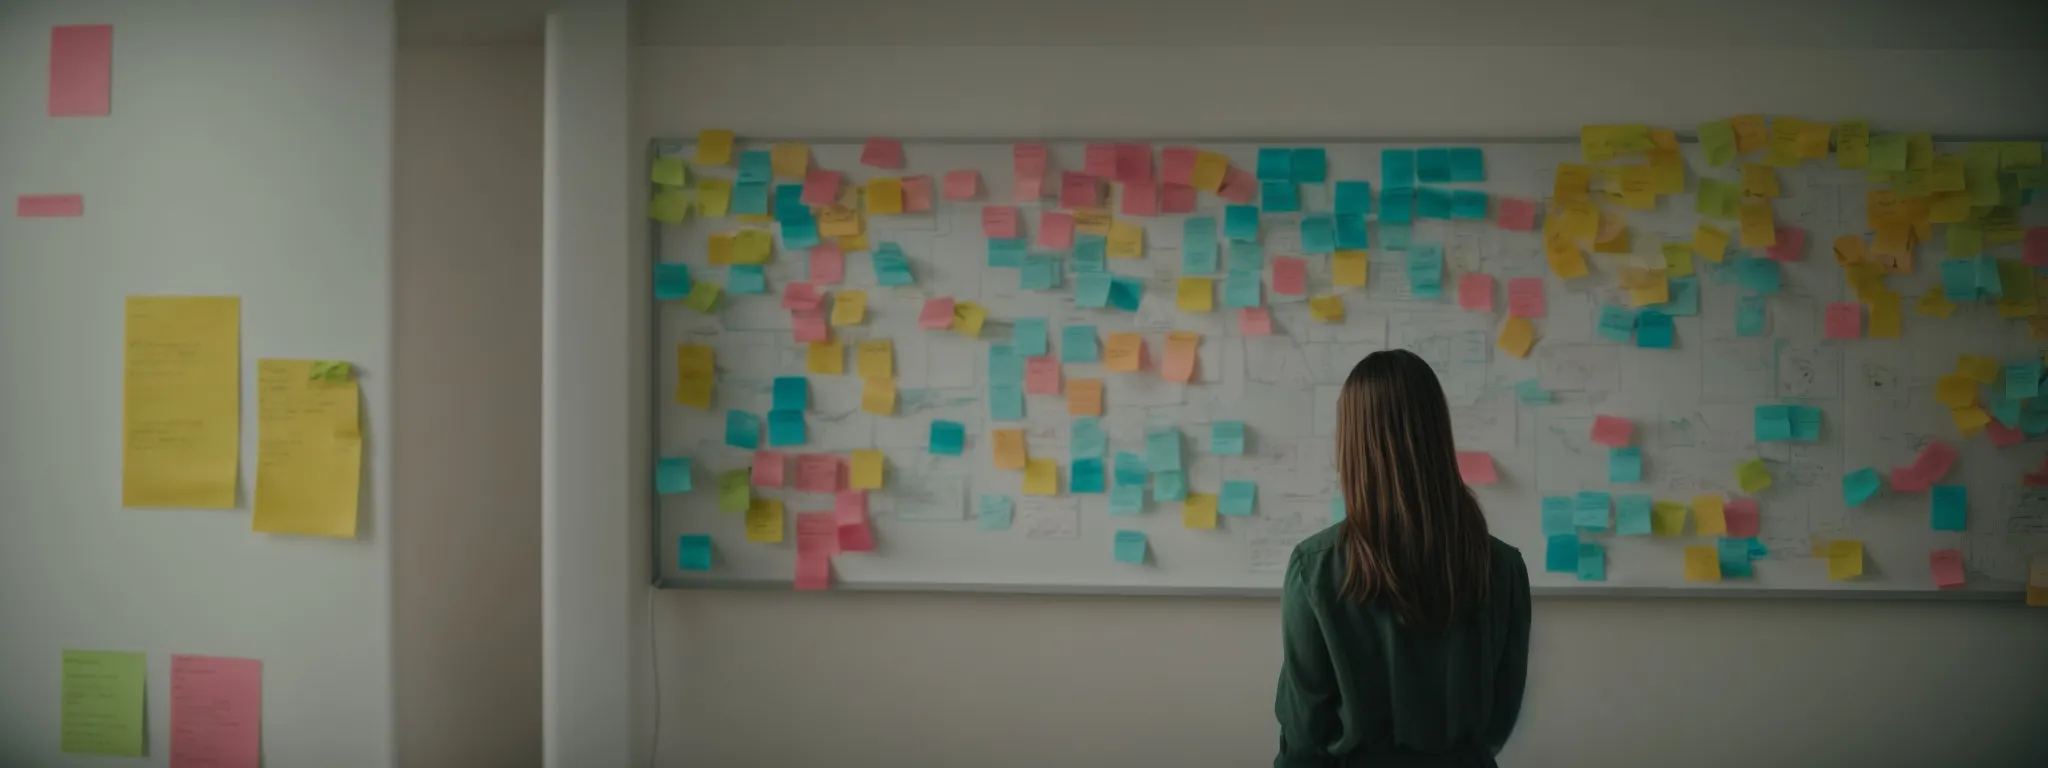 a person stands in a well-lit room, looking thoughtfully at a large whiteboard covered in colorful sticky notes and content strategy diagrams.